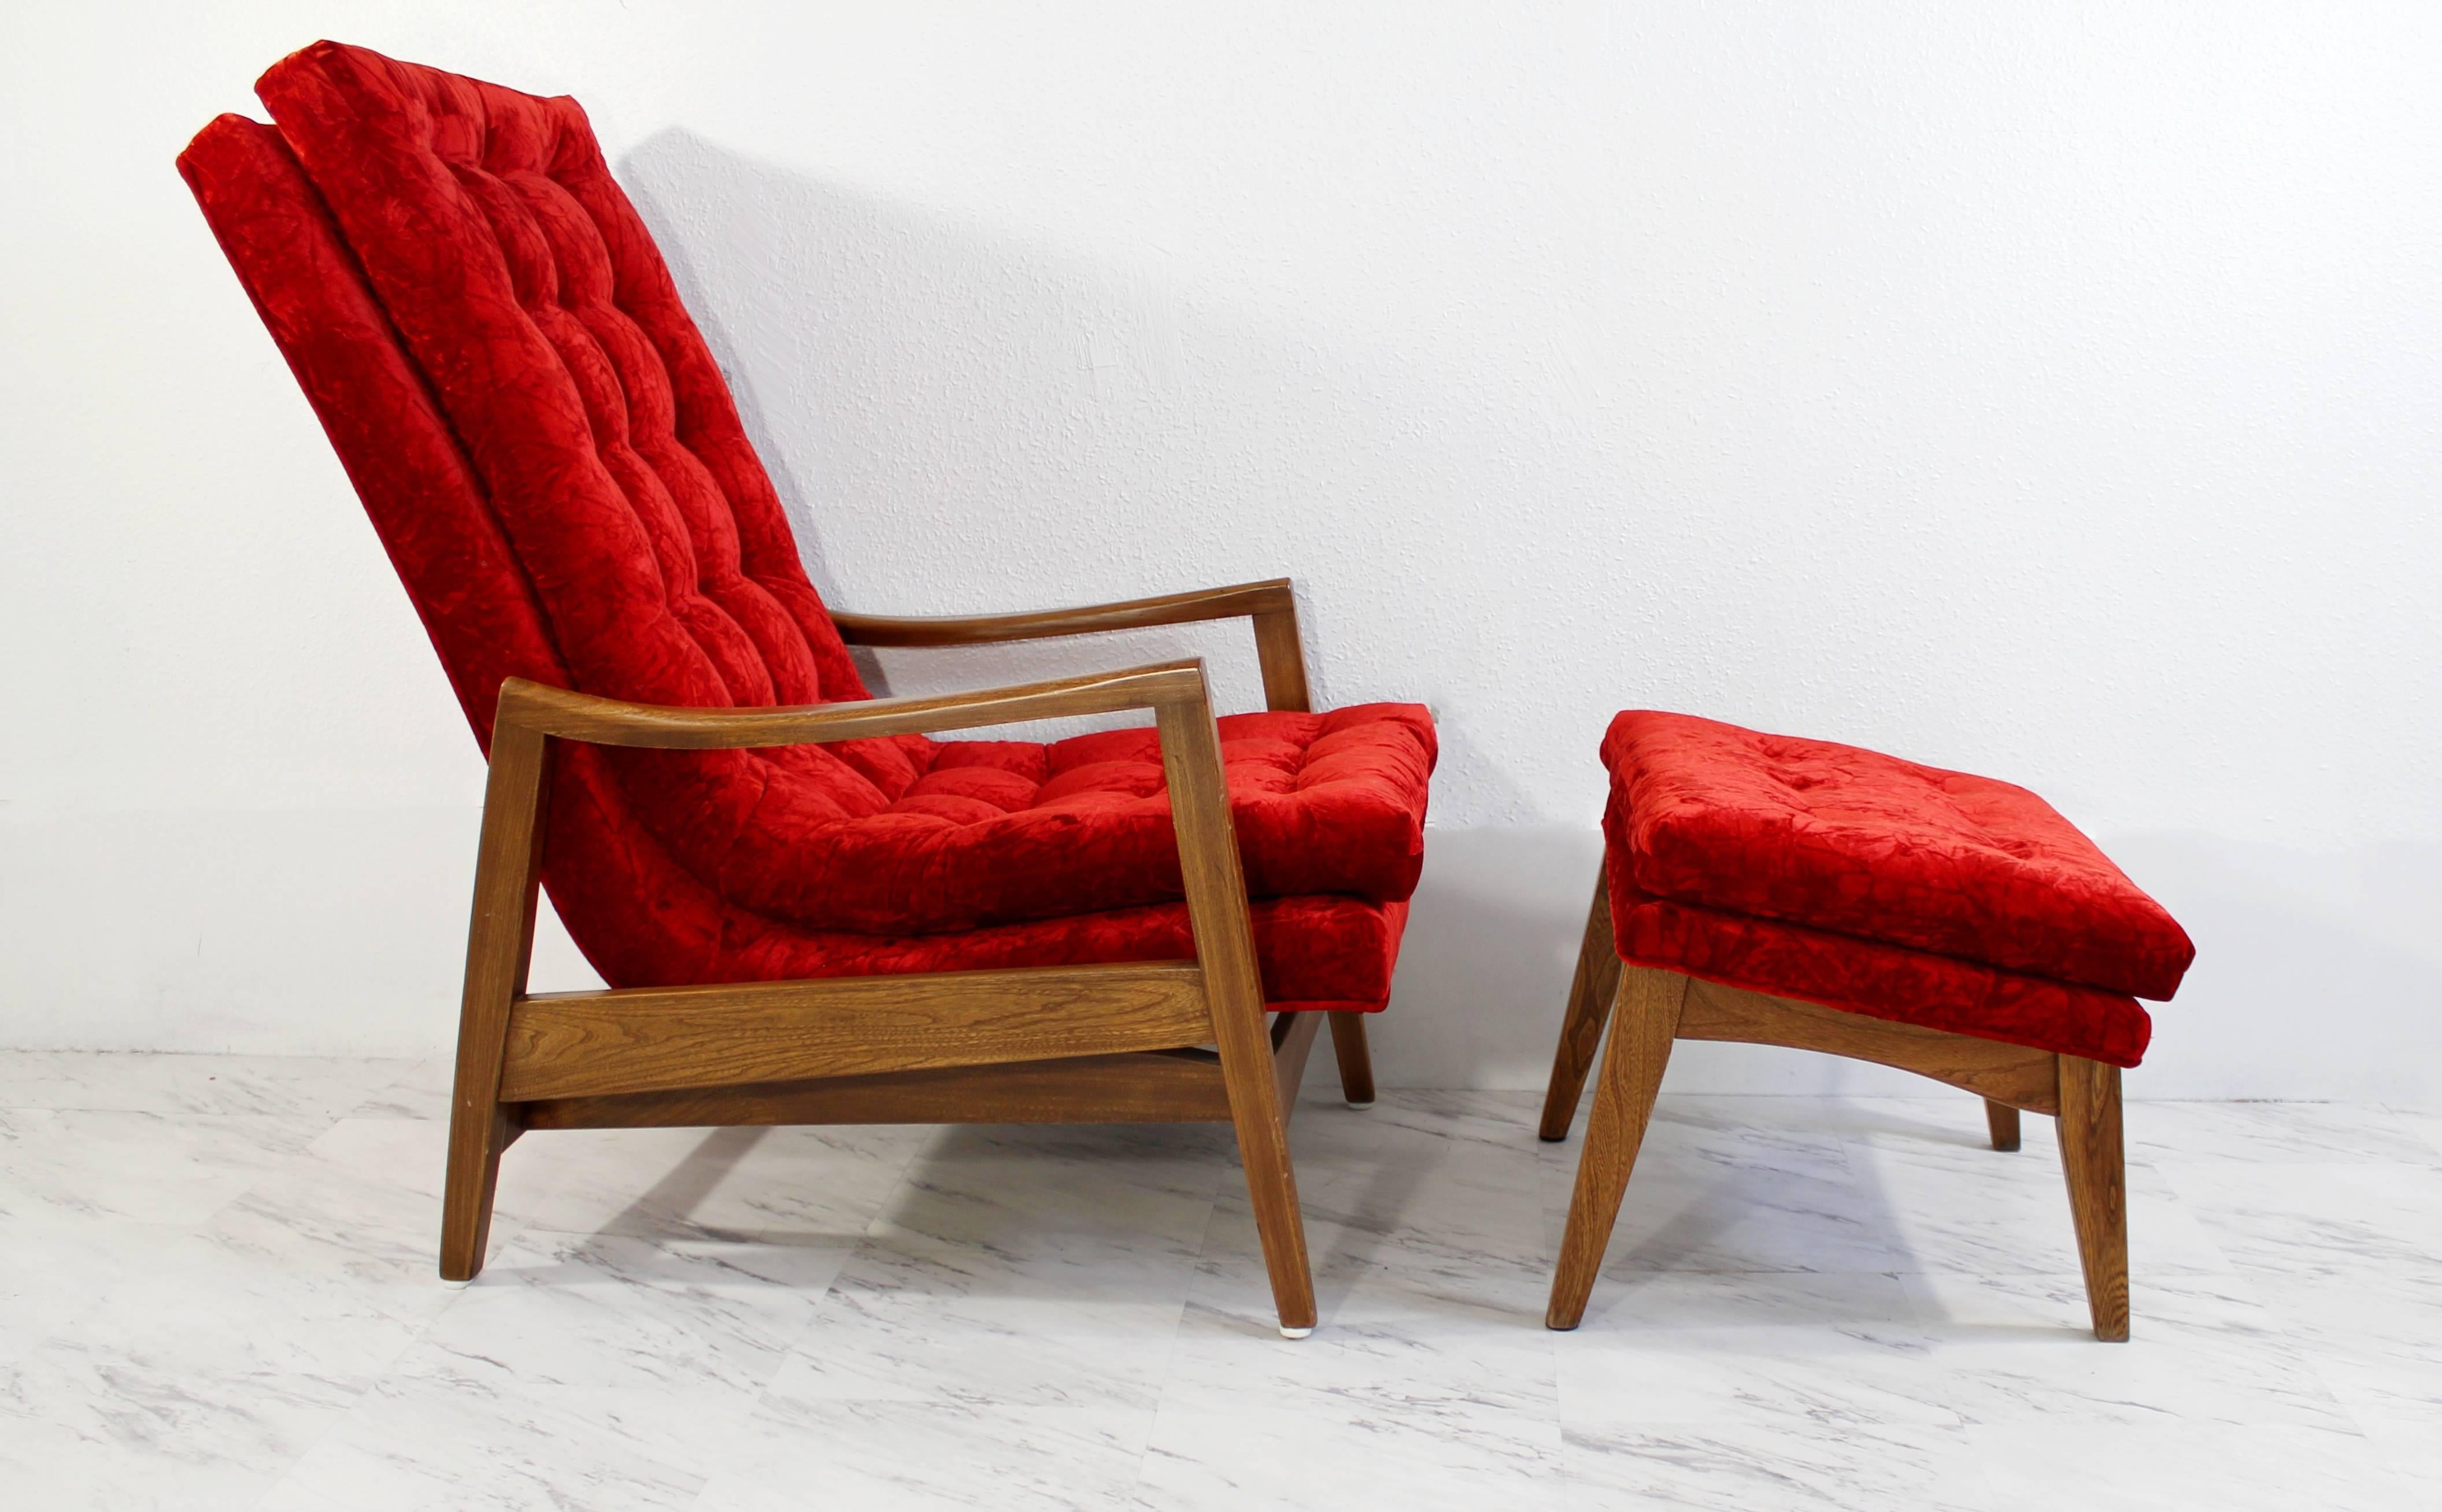 For your consideration is a magnificent, walnut rocker and ottoman, with a crushed velvet upholstery (Chinese red) by Milo Baughman. In great condition. The dimensions of the chair are 26.5